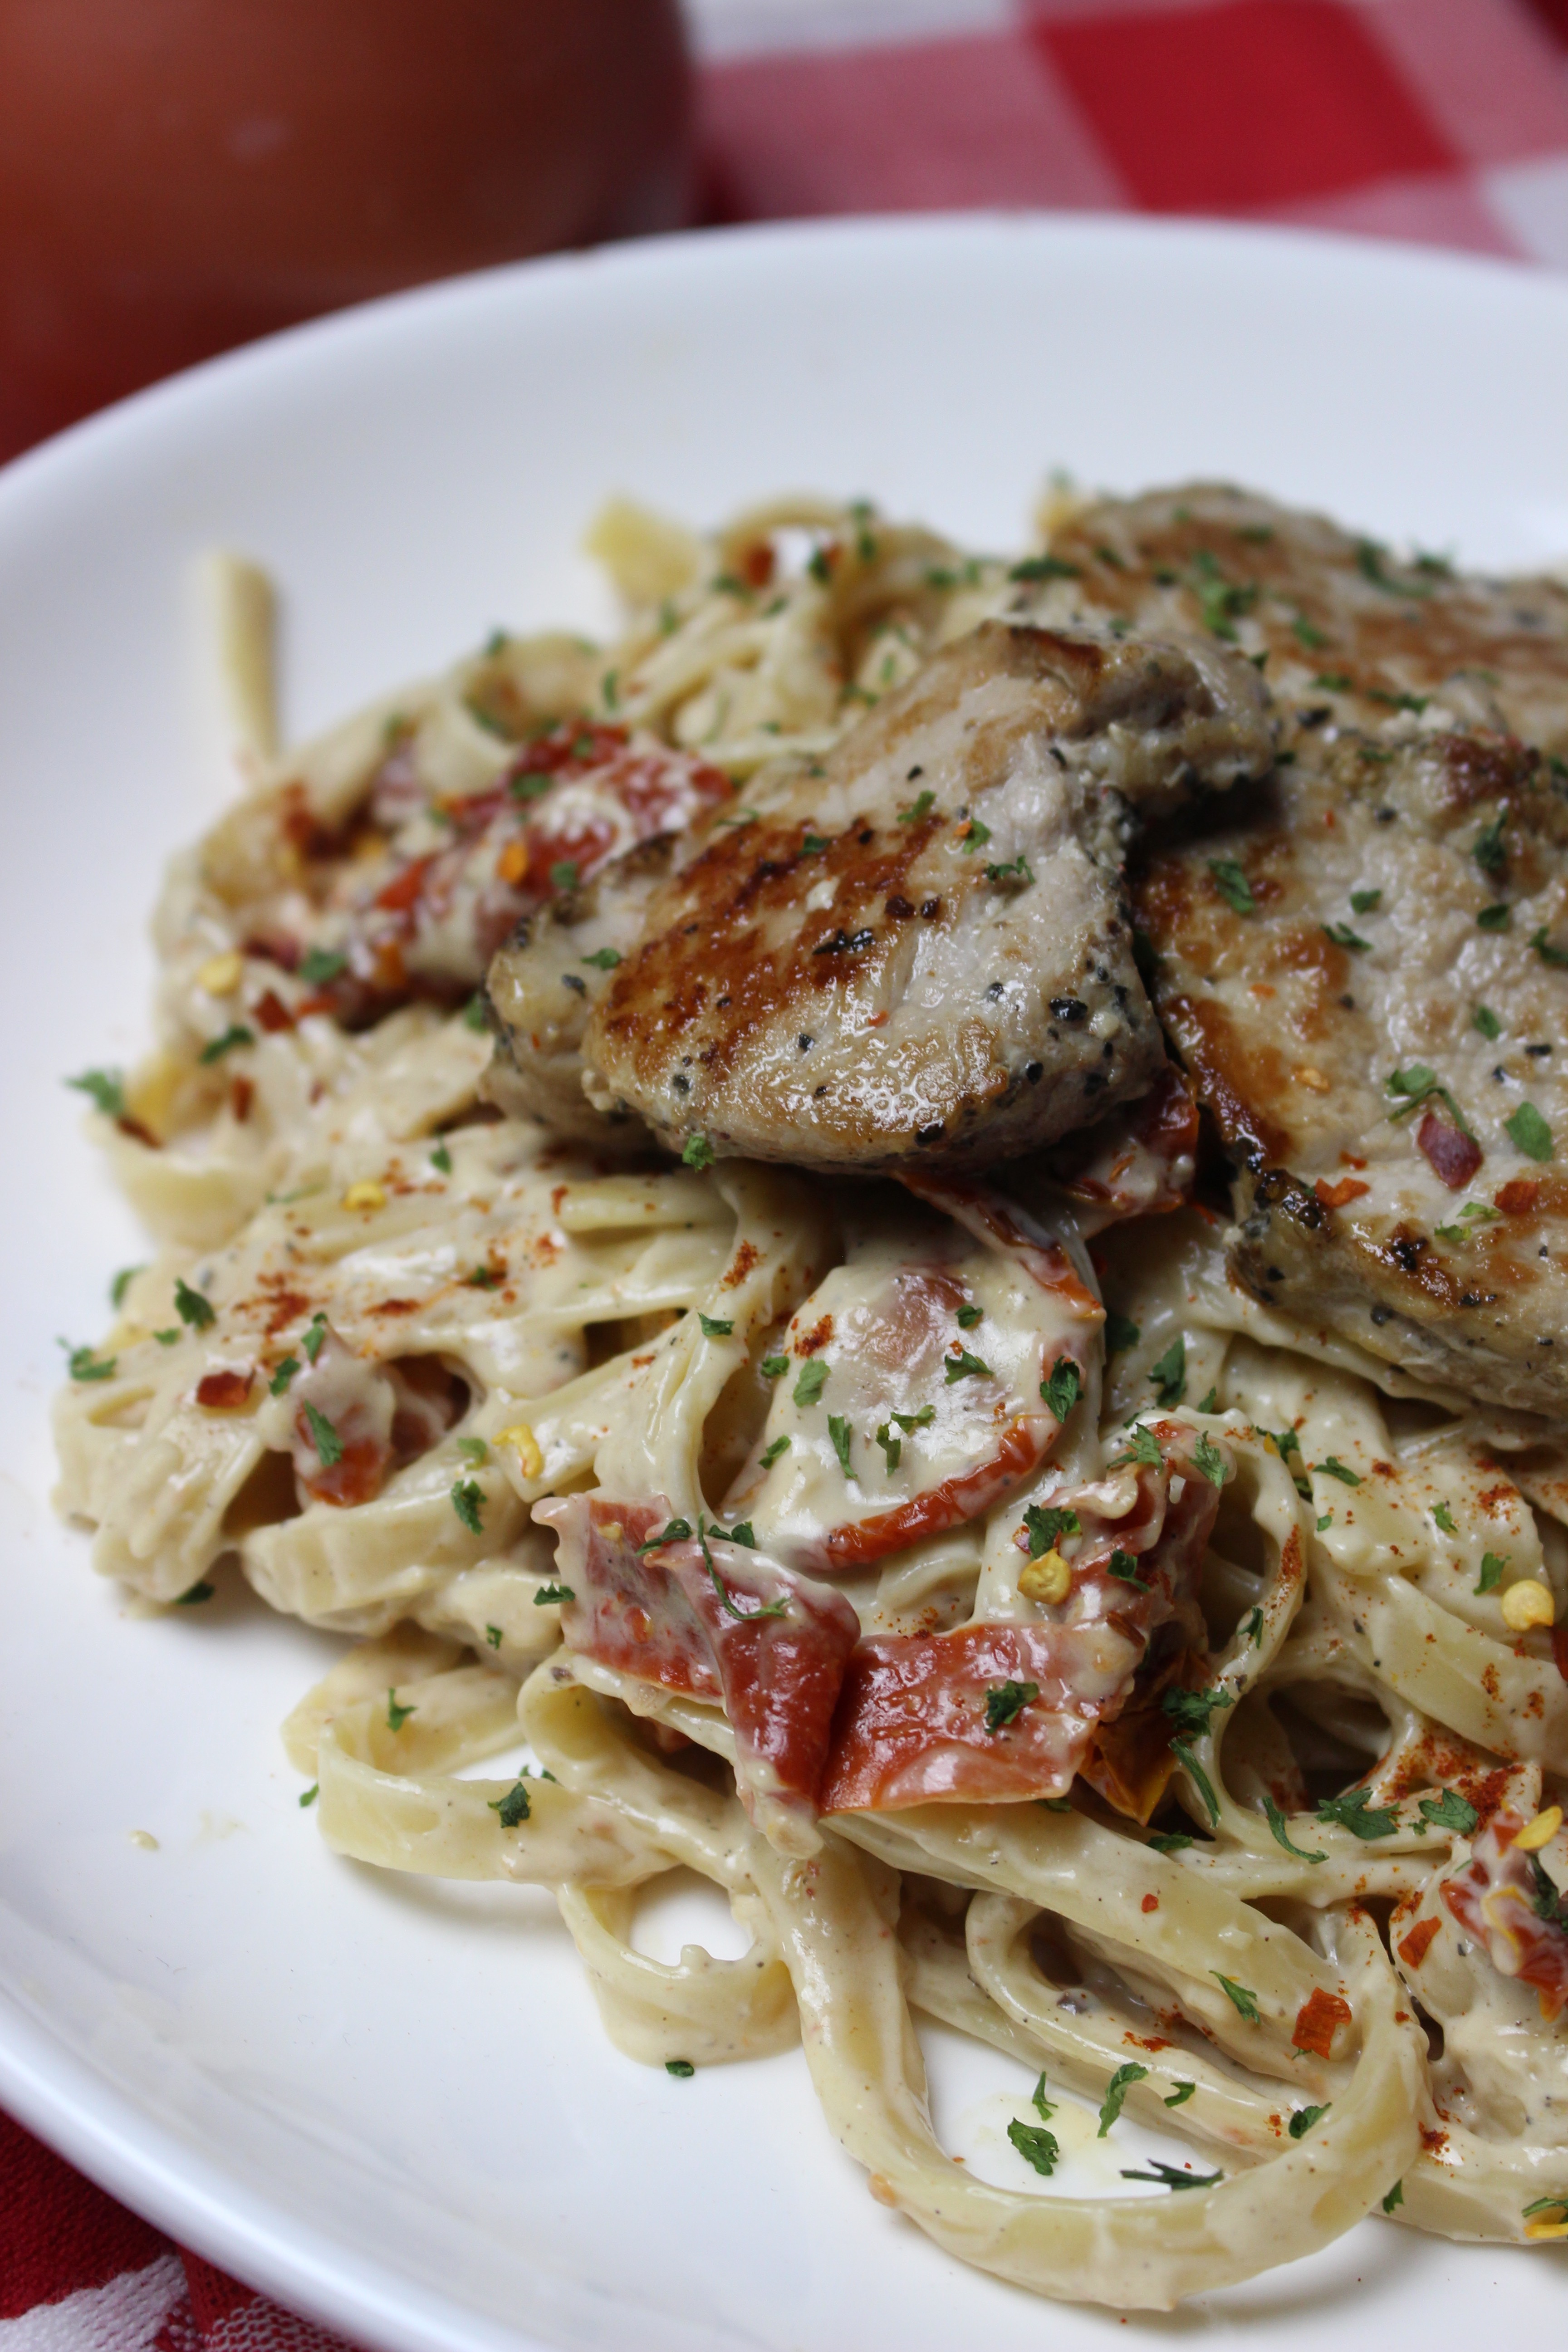 Savory grilled pork and sun dried tomatoes Alfredo on a bed of tender pasta sprinkled with red pepper flakes. A great date-night meal for two!